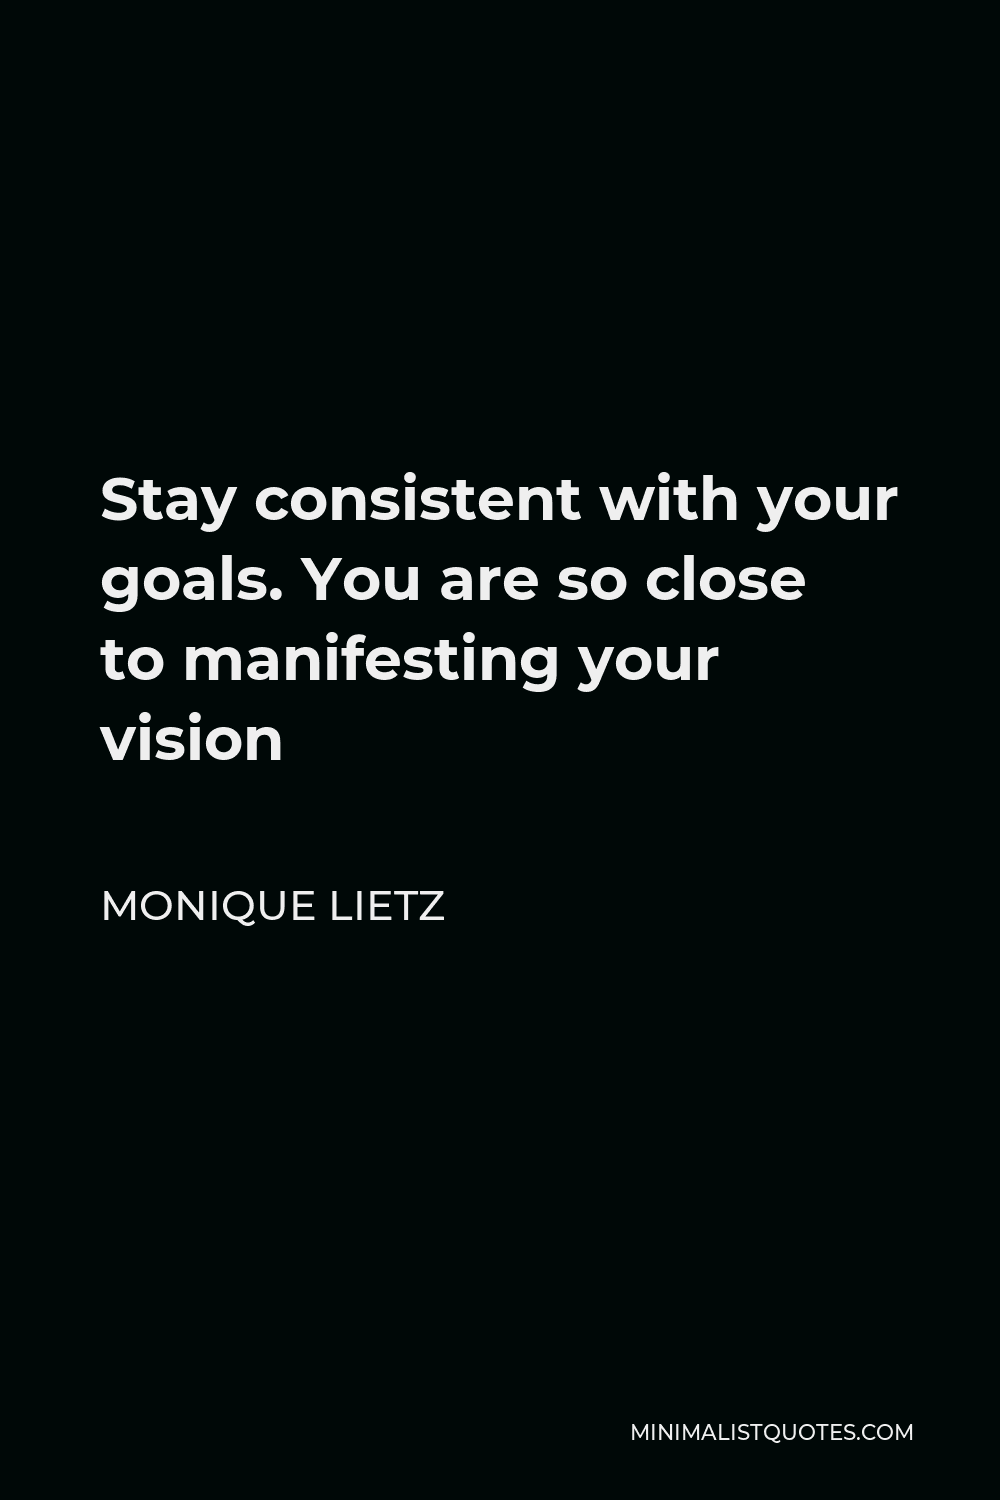 Monique Lietz Quote: Stay consistent with your goals. You are so close ...